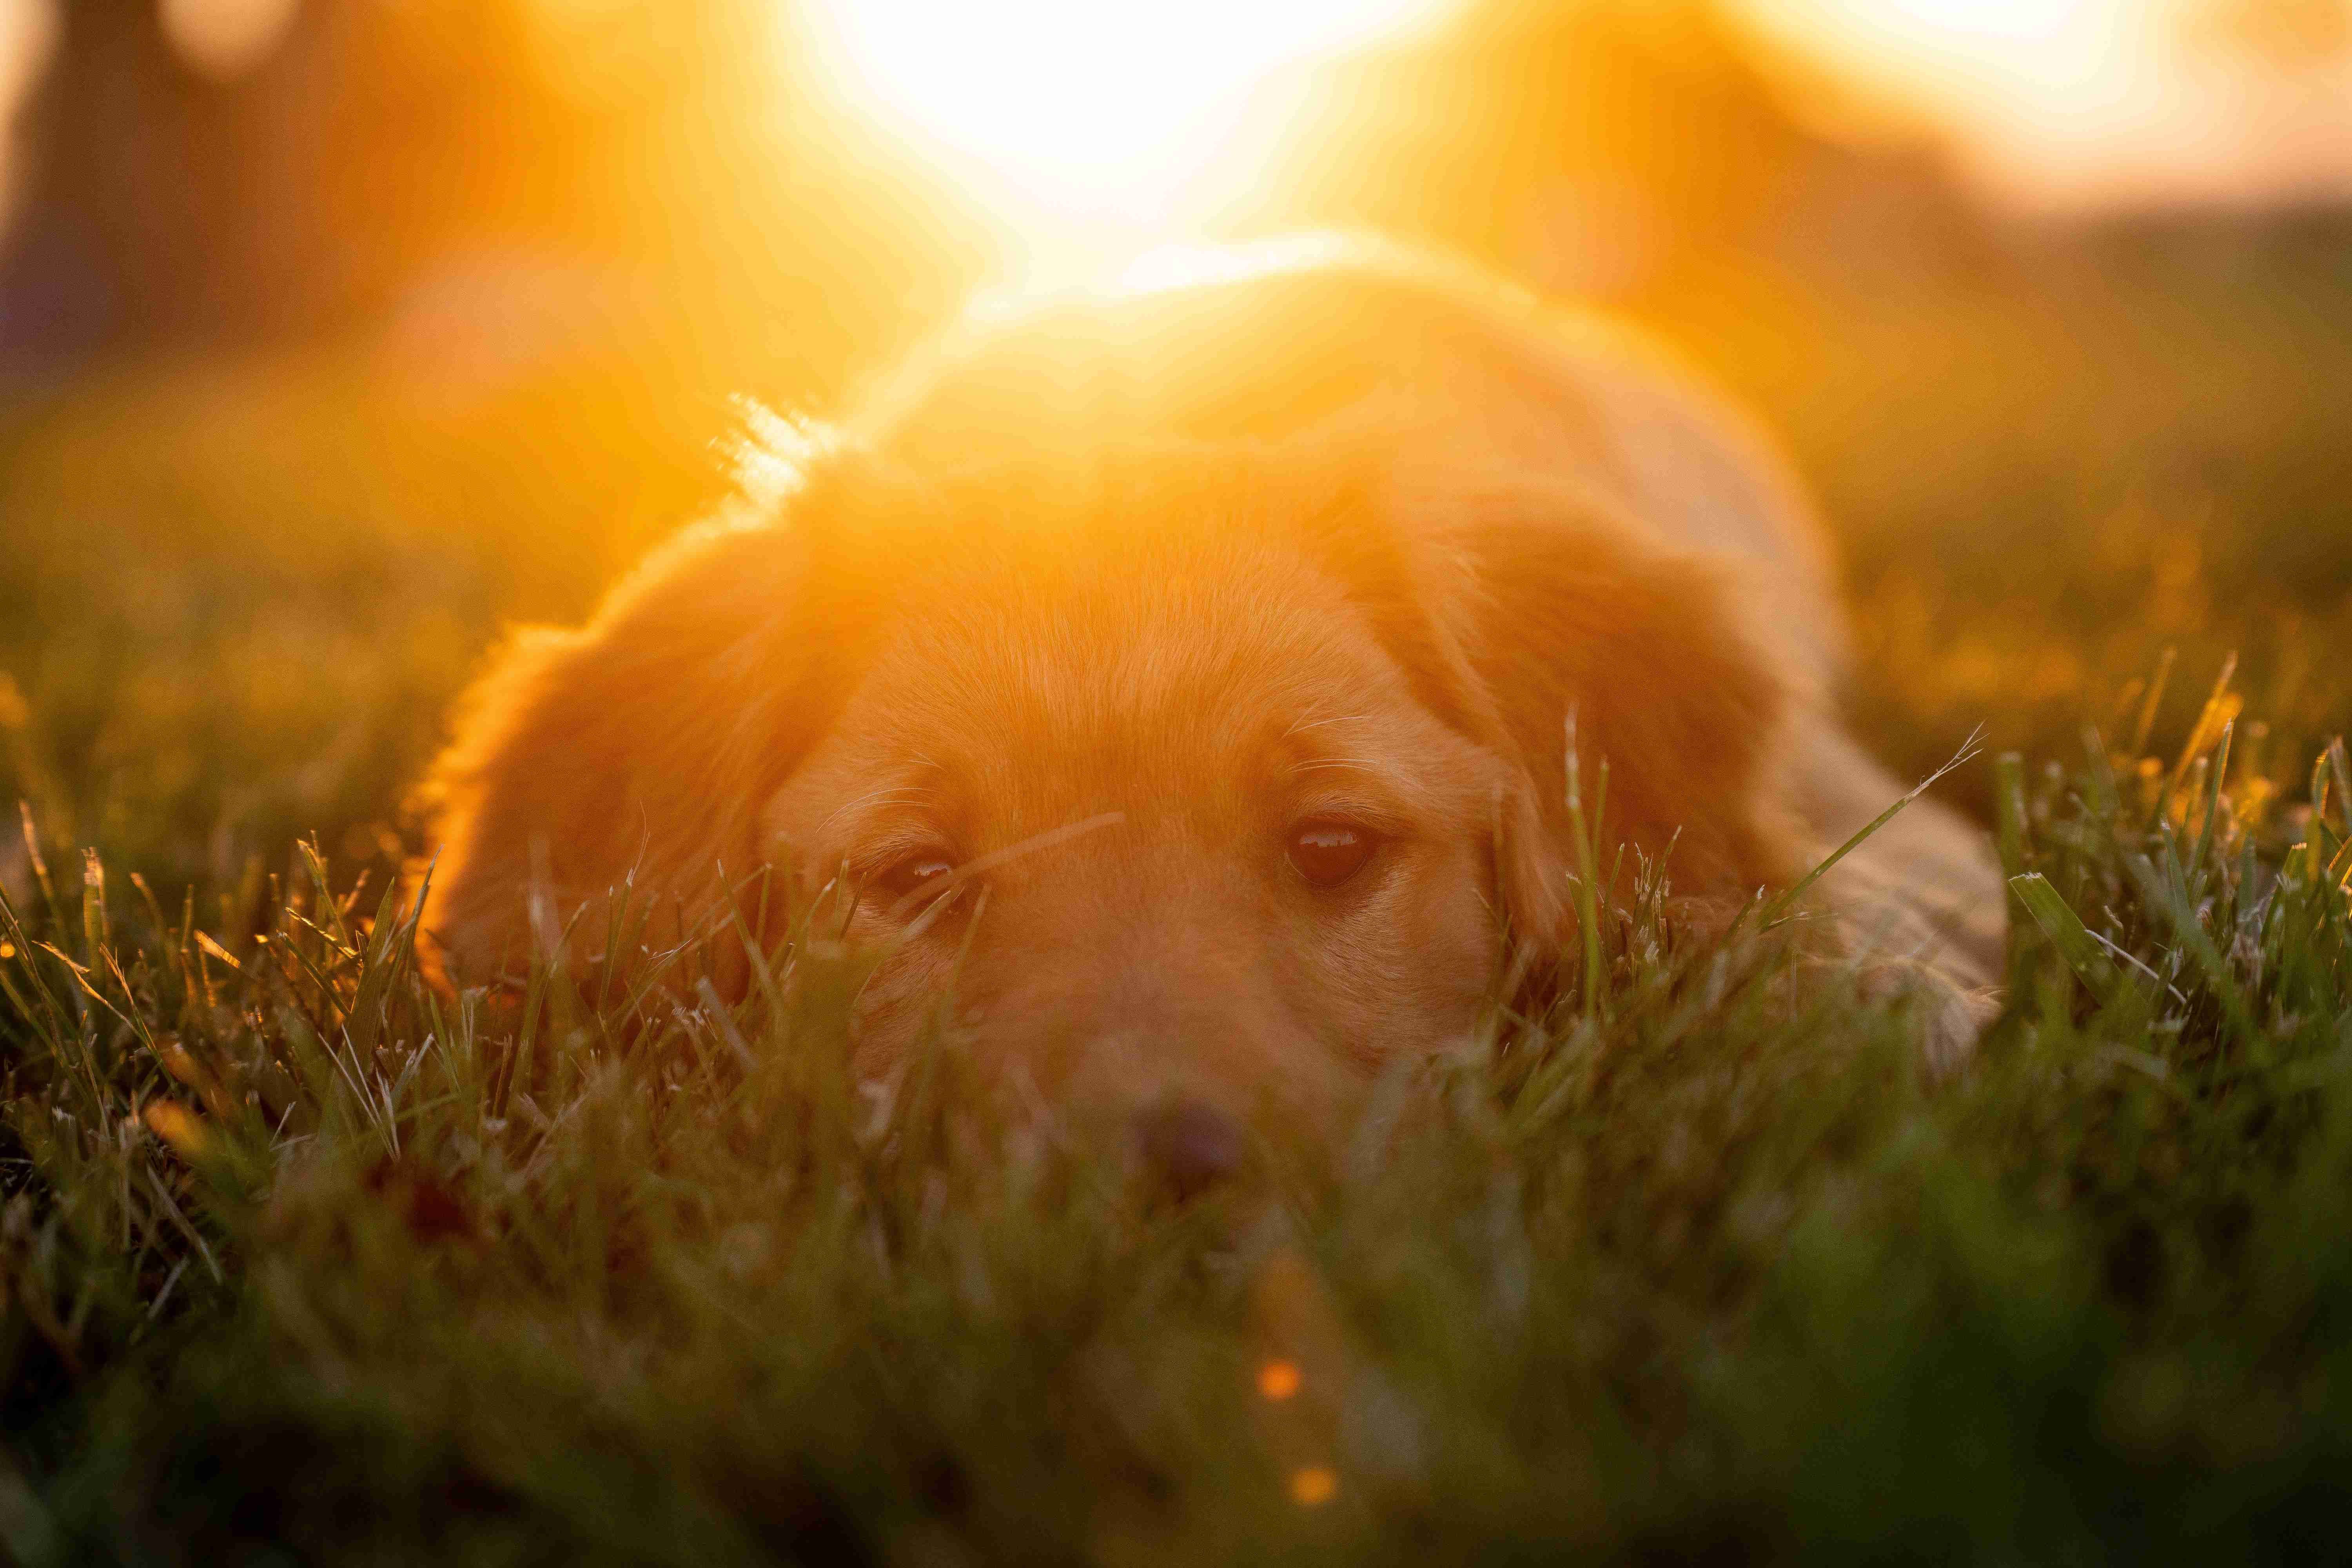 Are golden retrievers more prone to certain types of cancer?